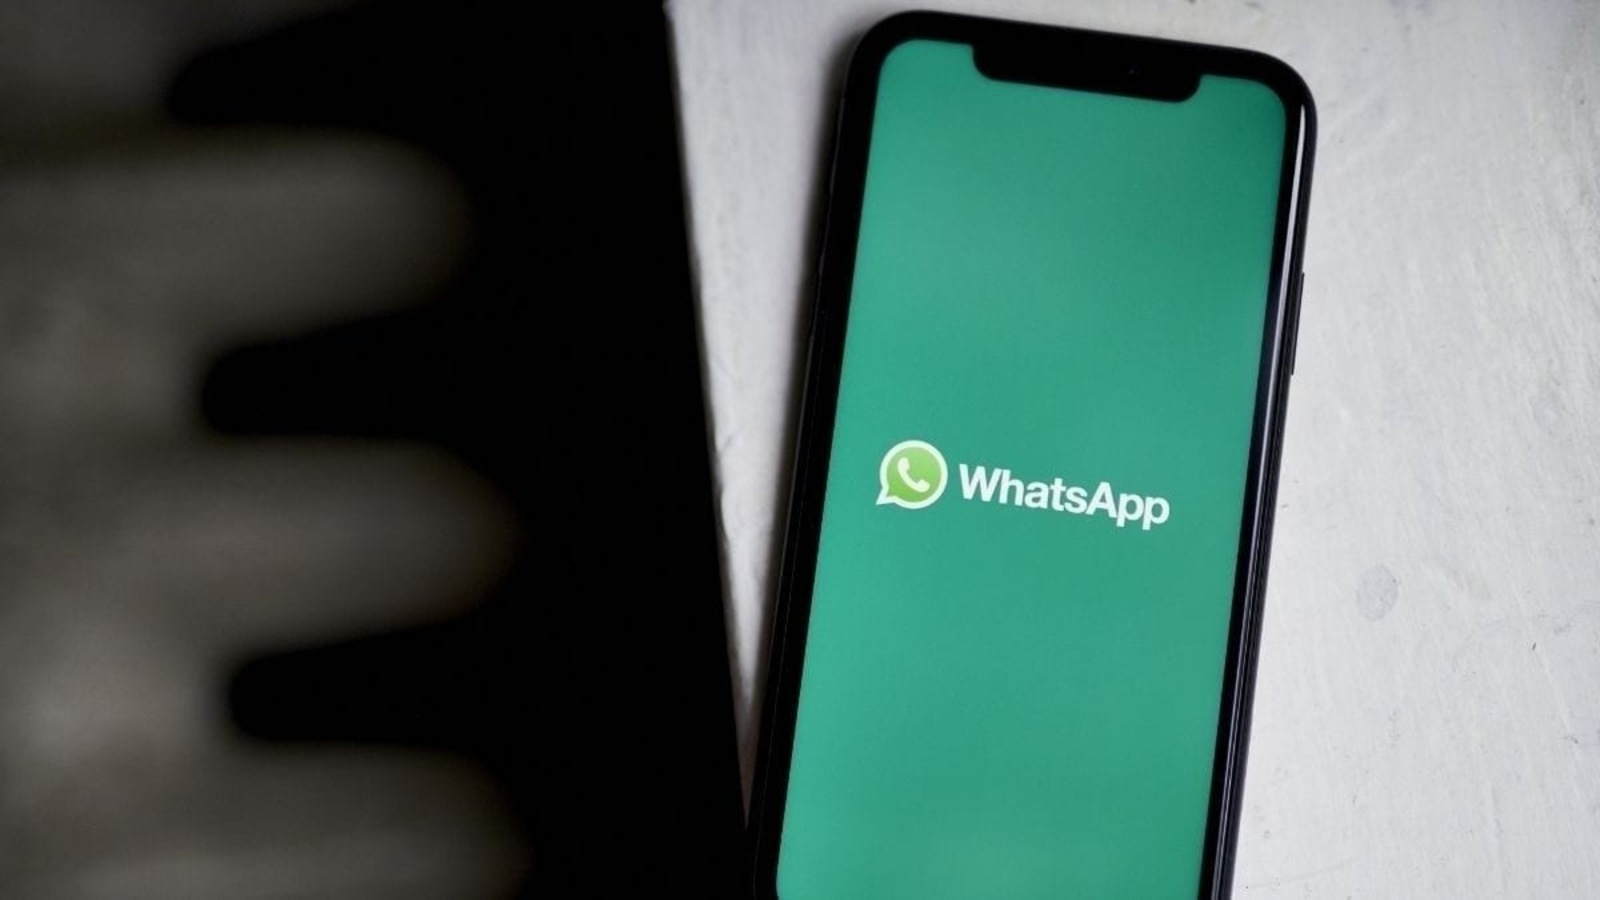 WhatsApp introduces new privacy feature to mask IP address in calls